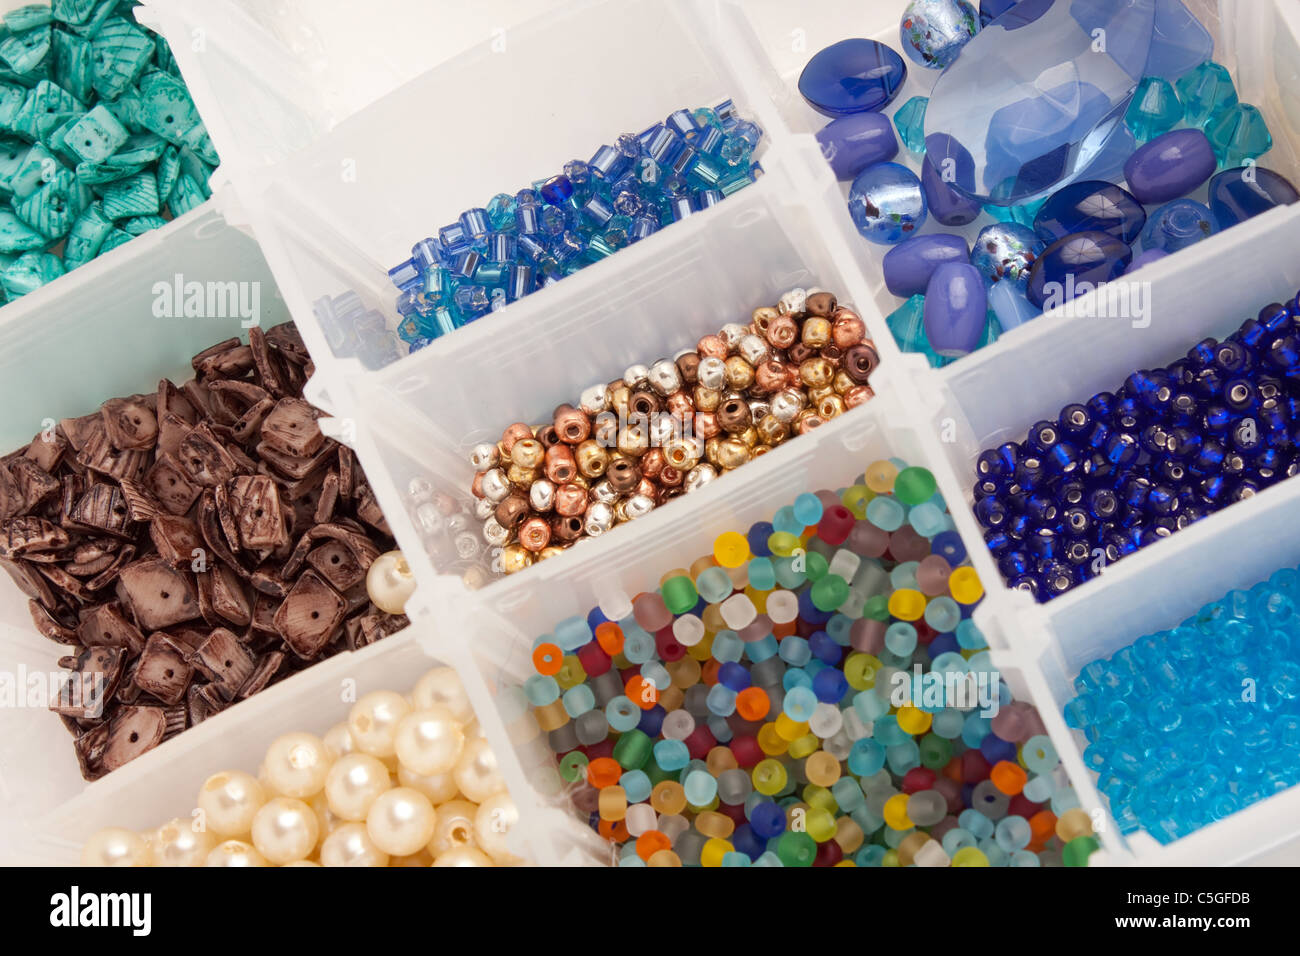 An organizer full of multi colored beads and tools for making jewelry and crafts. Stock Photo